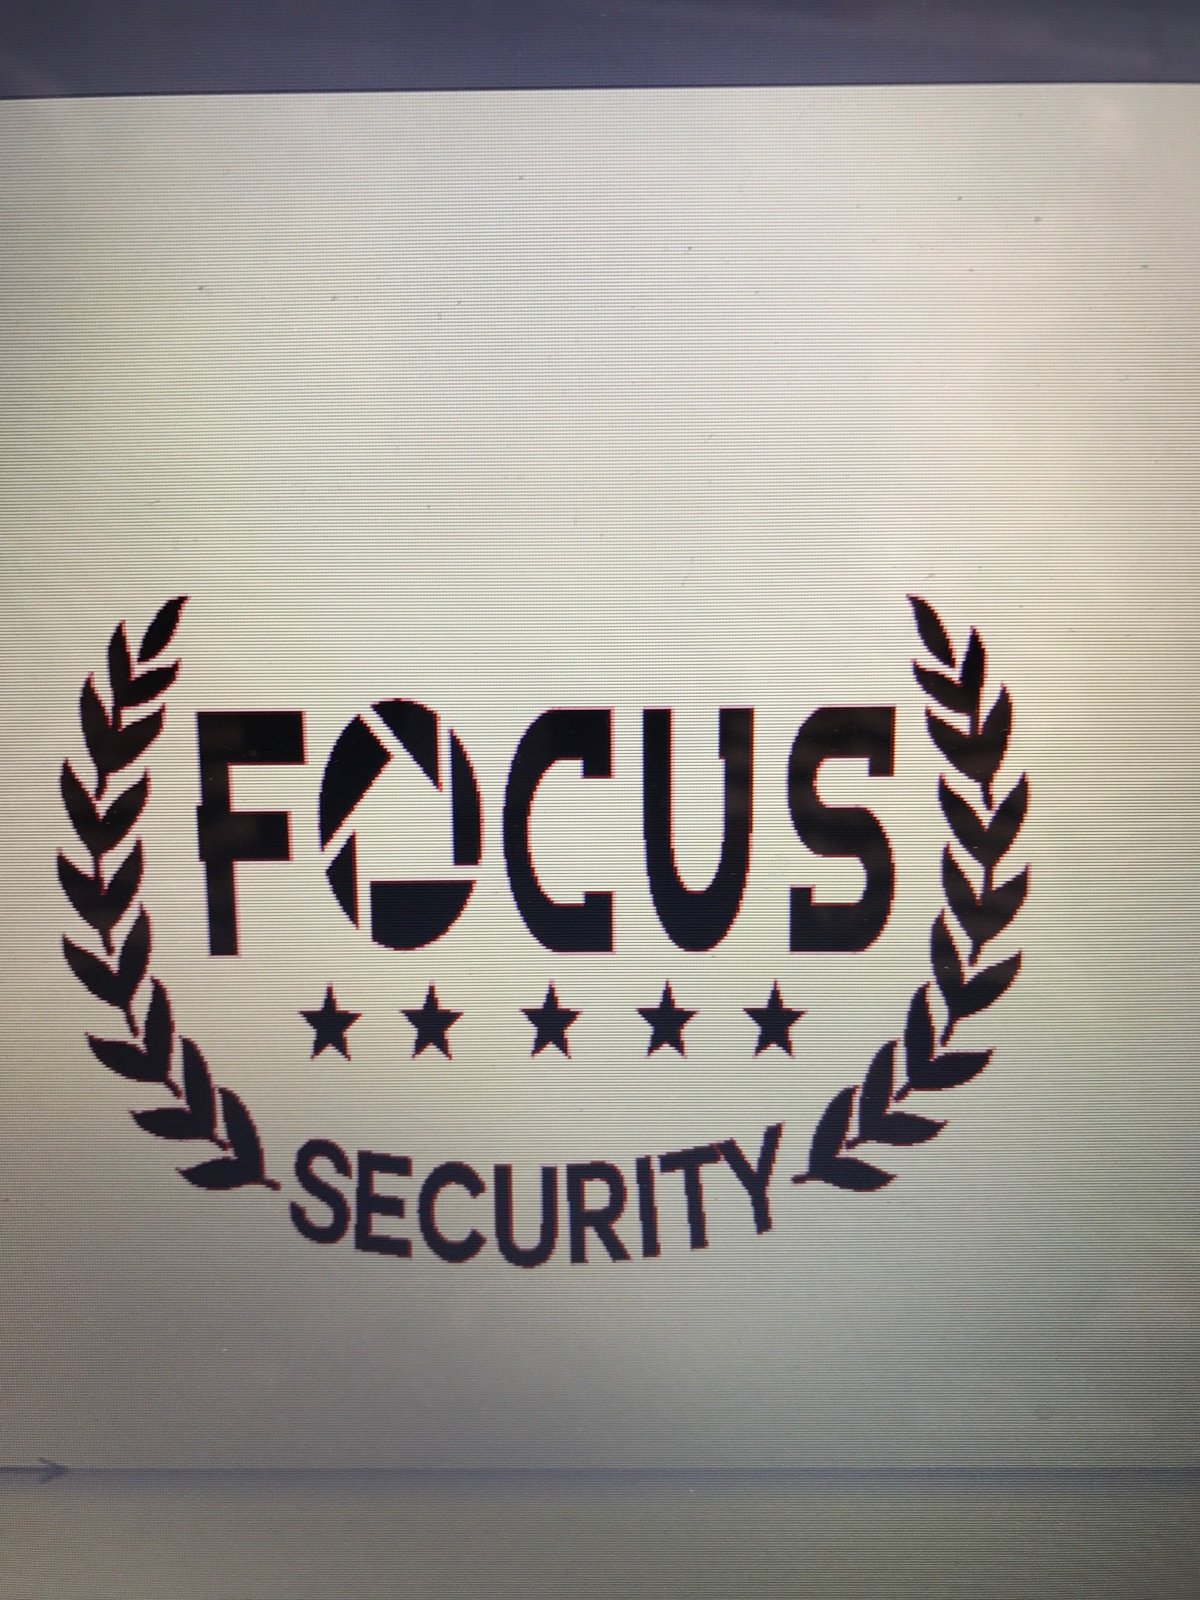 Focus Security Armed and Unarmed. We offer business,home, and personal security. Call today for quote 662-245-9242. focusdefense23@gmail